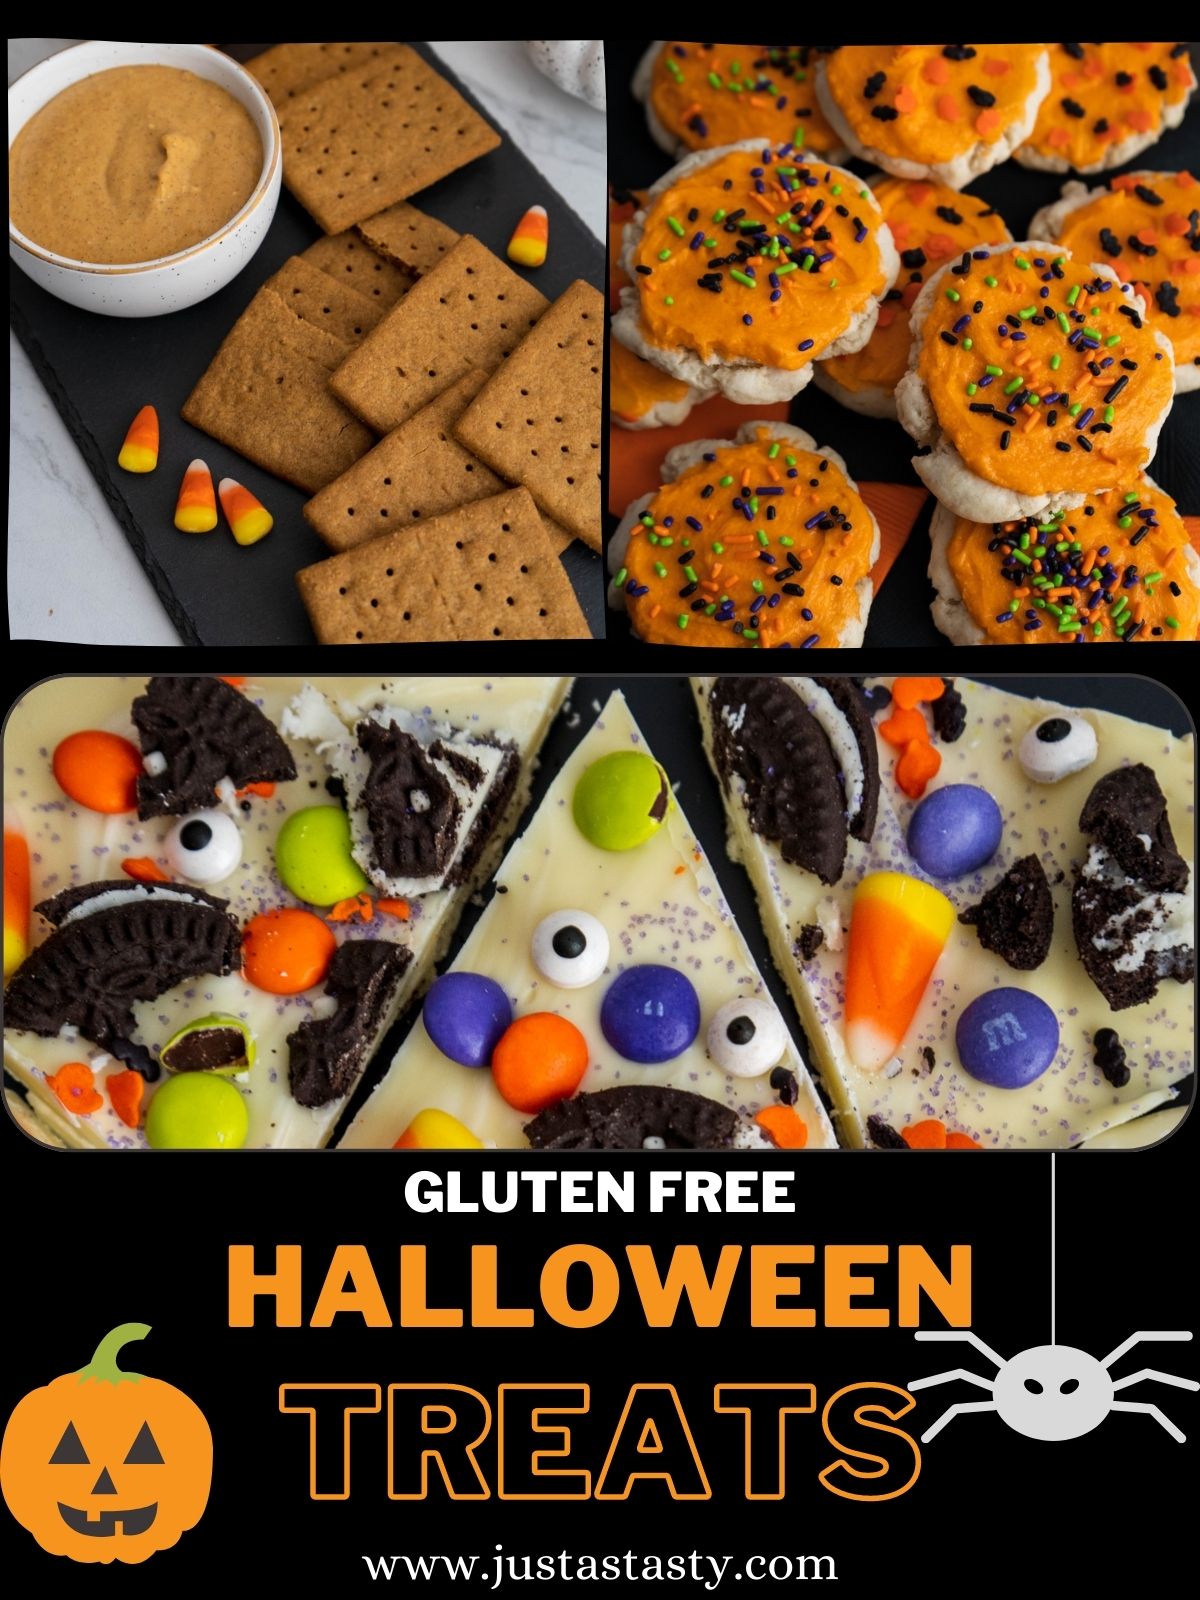 Collage of images featuring pumpkin dip, orange frosted cookies, and Halloween chocolate bark.